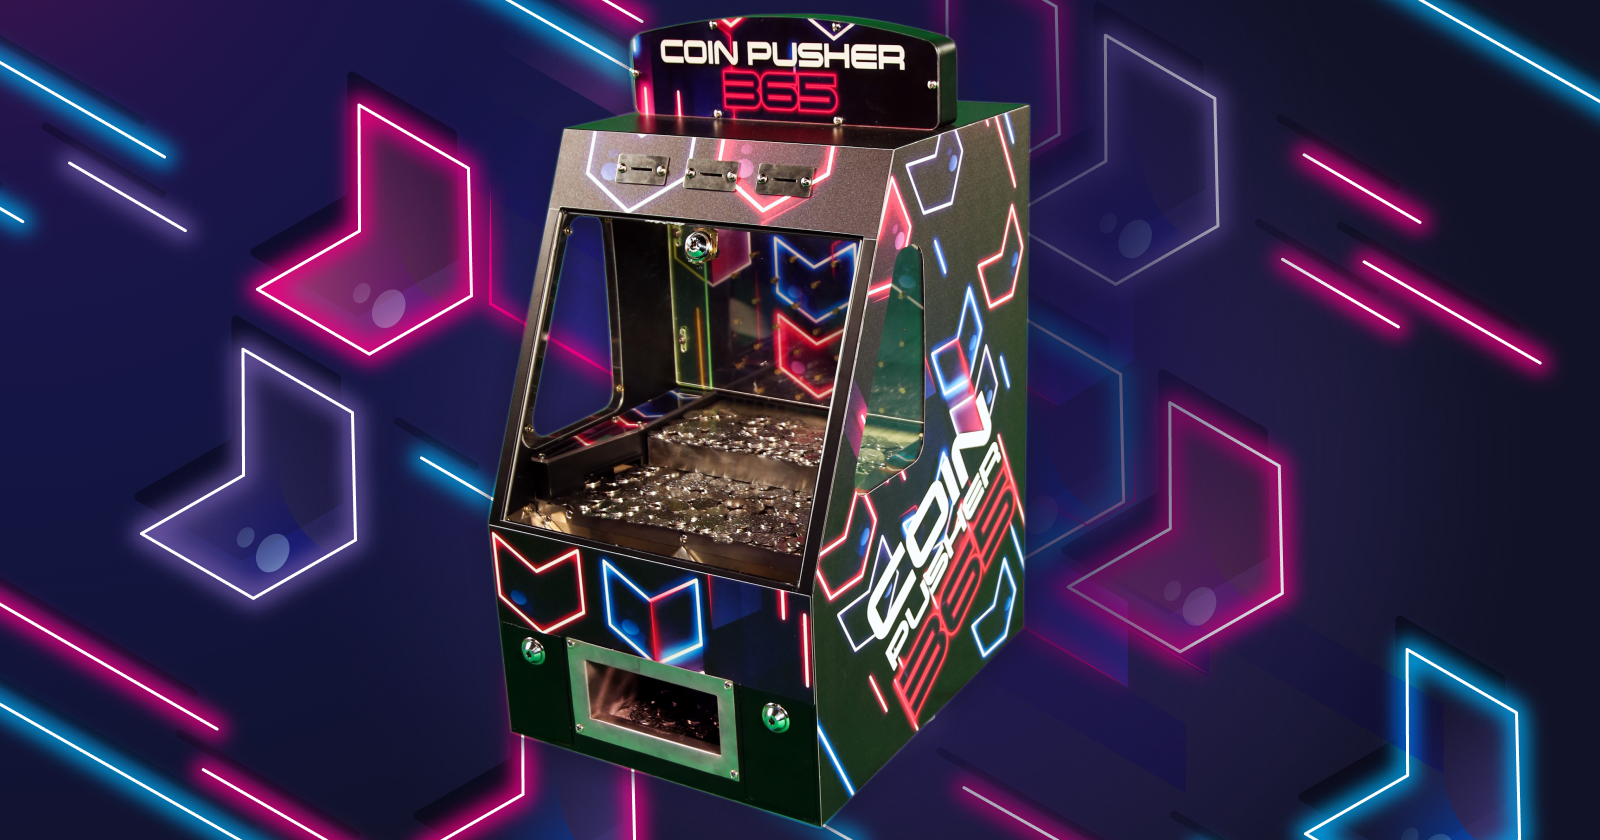 Coin Pusher 365 Front image